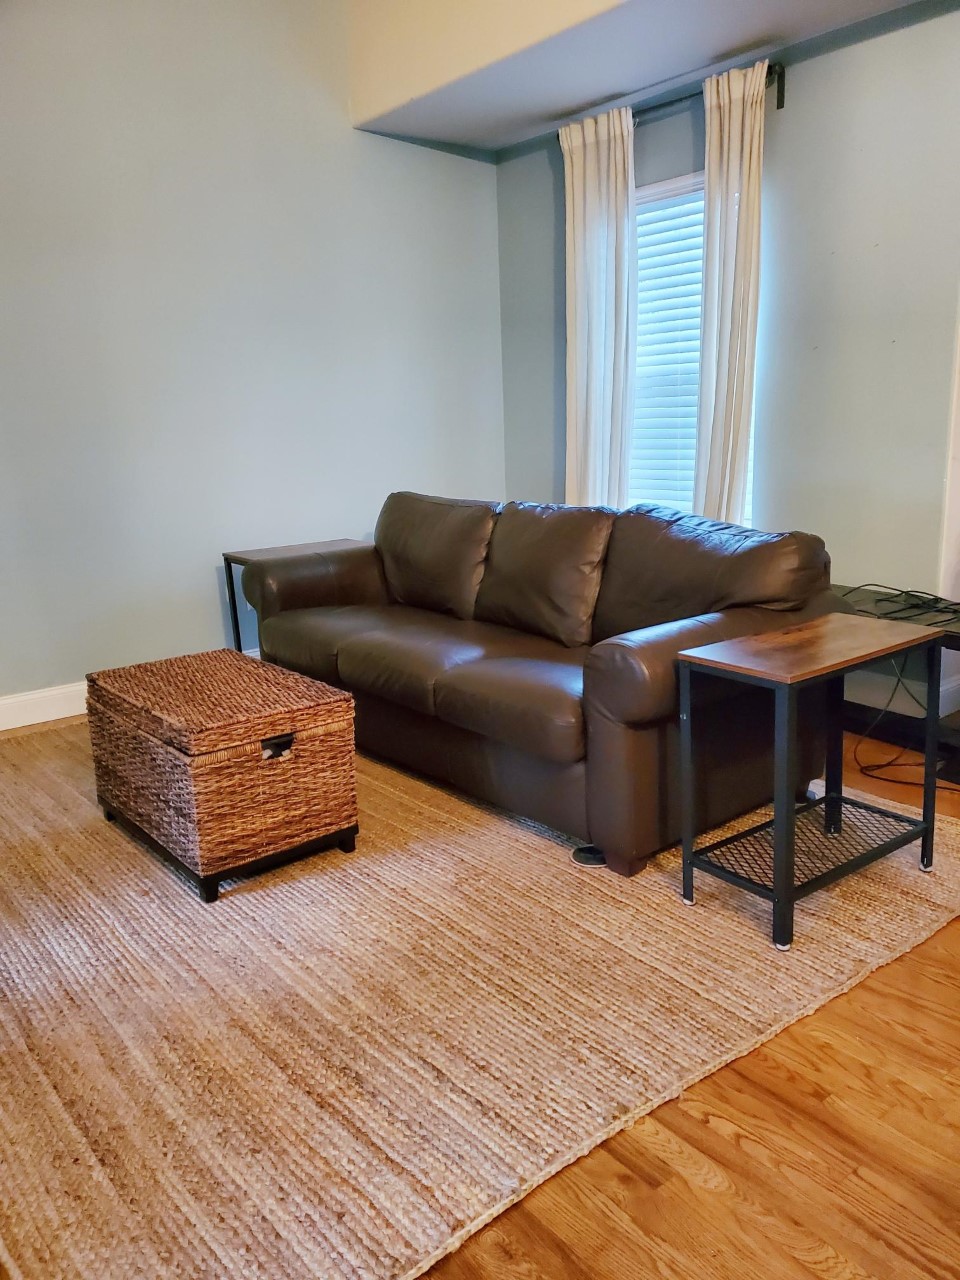 Jute rug placement in living room.